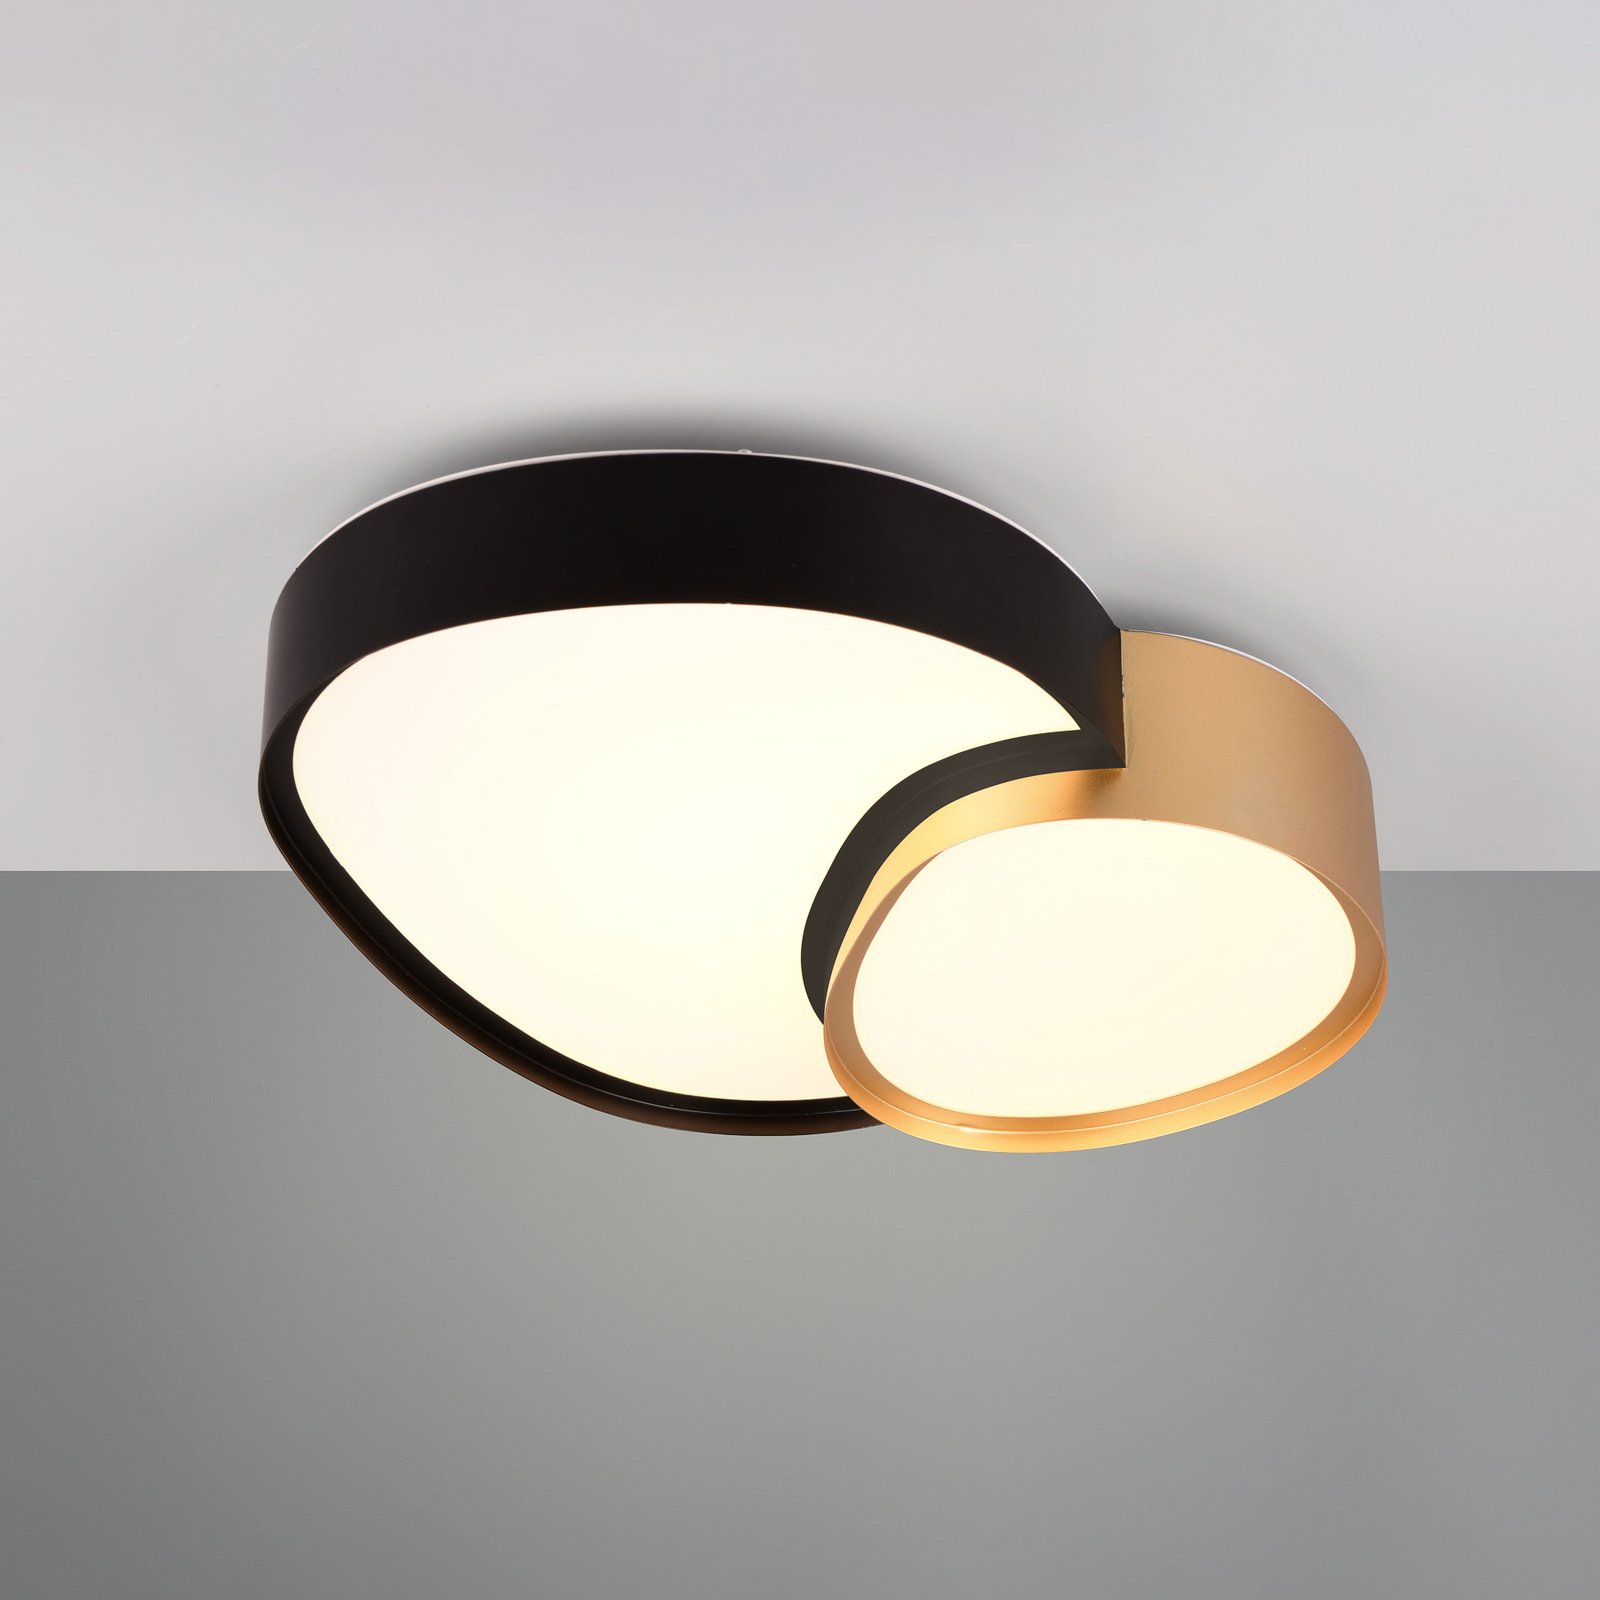 LED ceiling lamp Rise, black-gold, 43 x 36 cm, CCT, dimmable